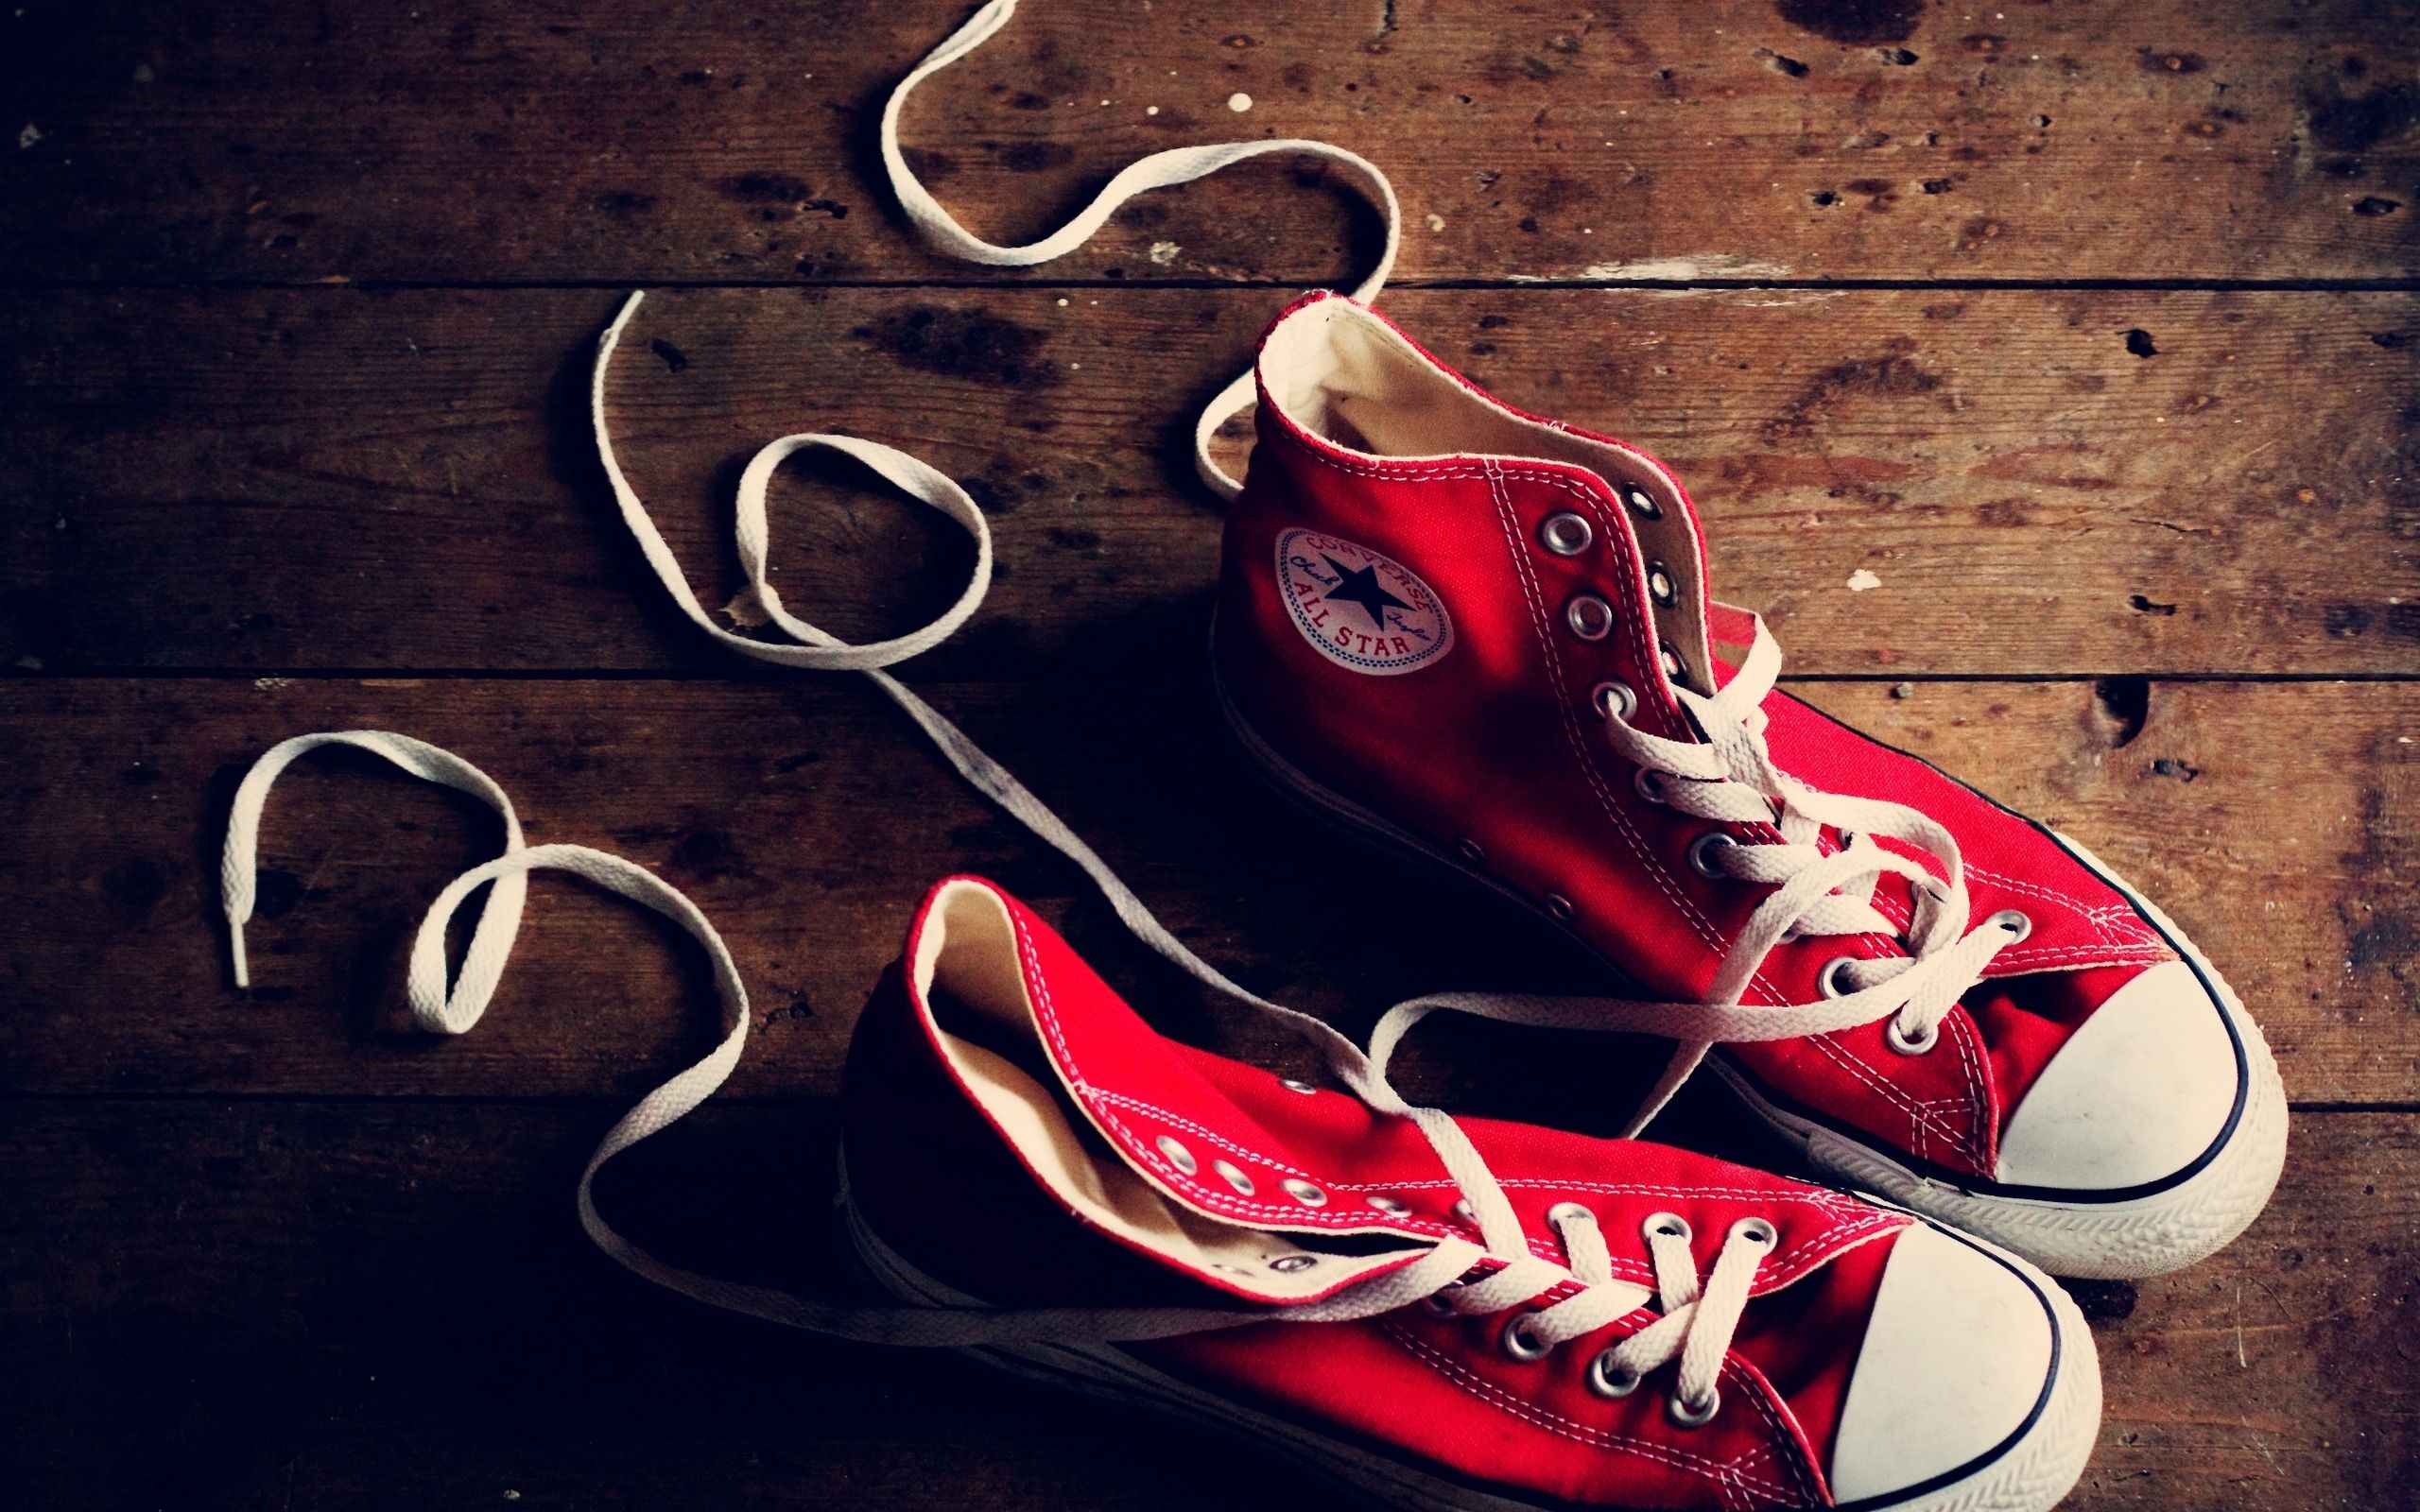 A pair of red sneakers on the floor - Converse